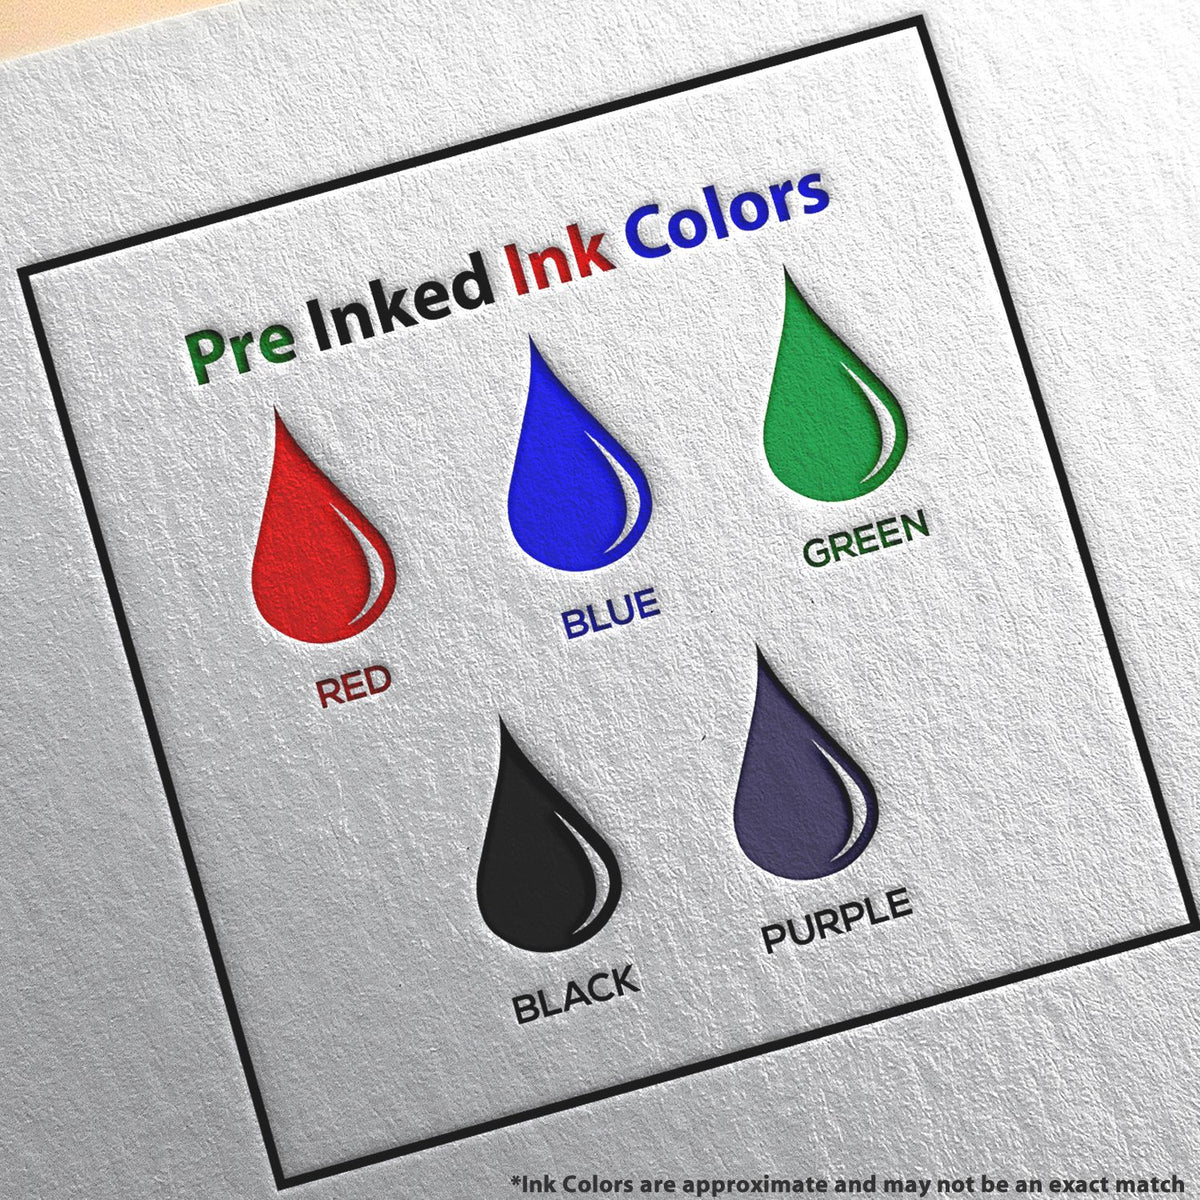 A picture showing the different ink colors or hues available for the Slim Pre-Inked Missouri Professional Engineer Seal Stamp product.